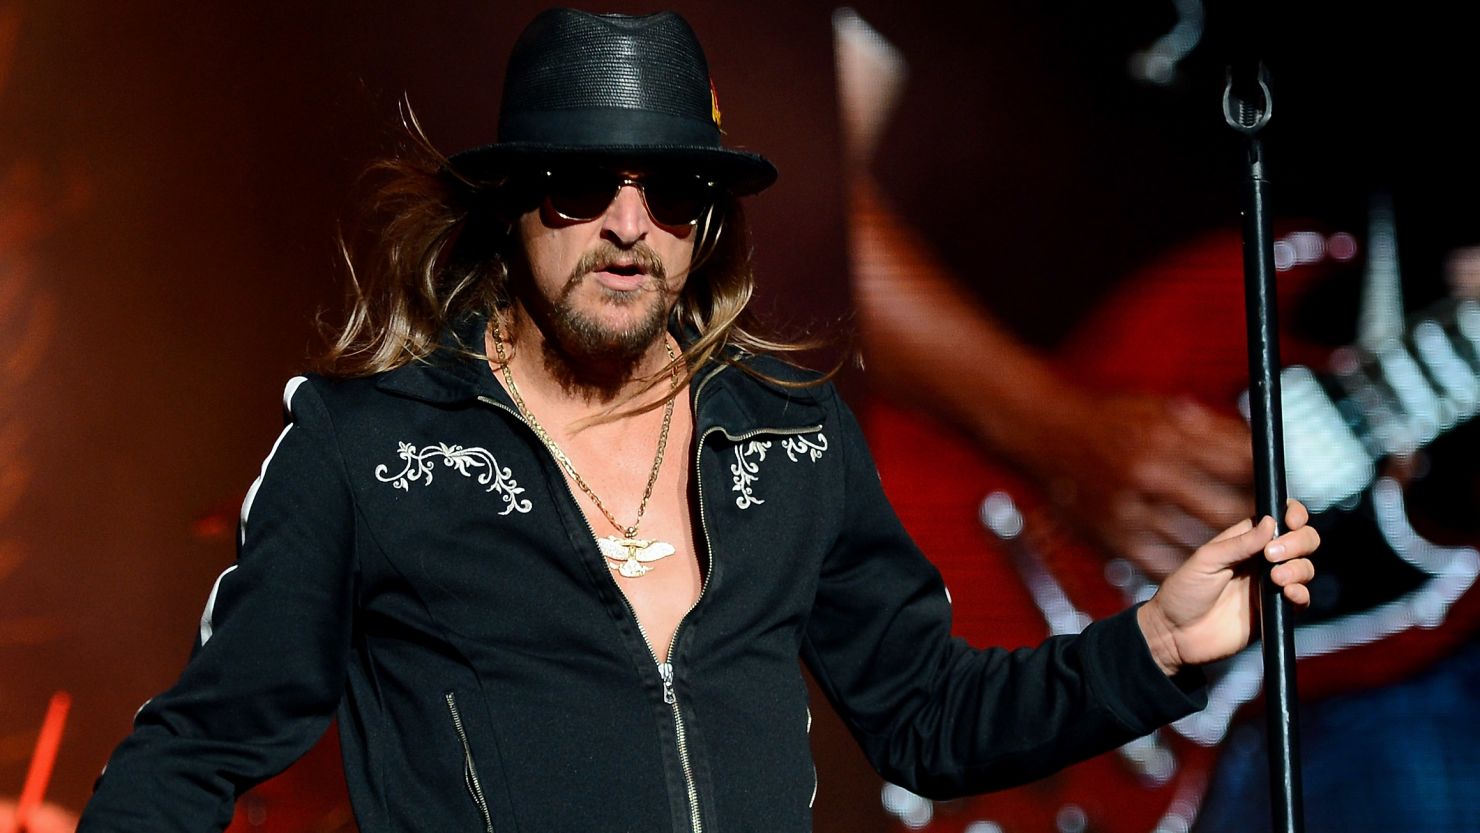 Police said Kid Rock discovered the body of his assistant, Mike Sacha.